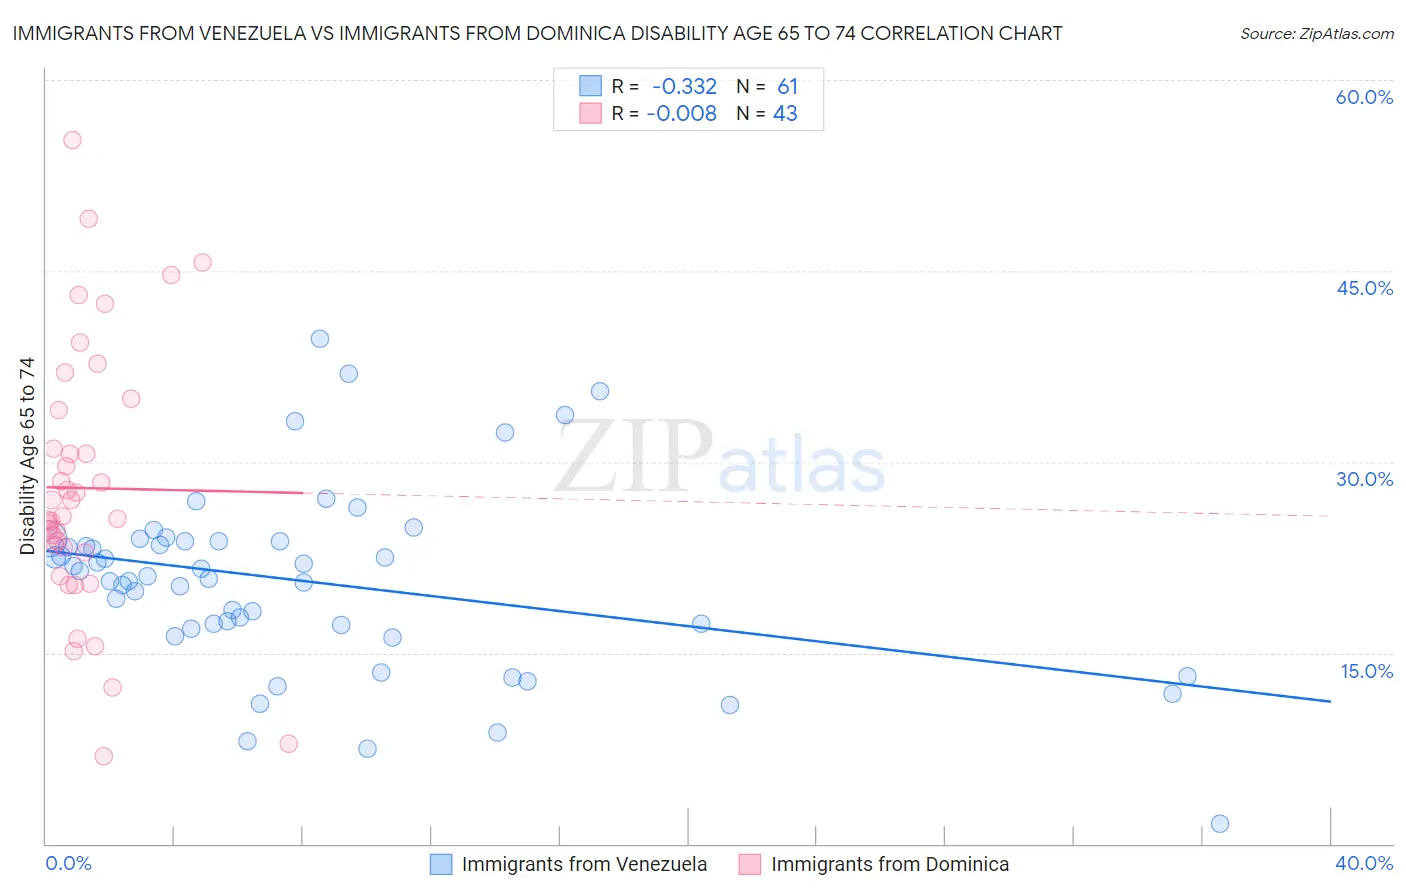 Immigrants from Venezuela vs Immigrants from Dominica Disability Age 65 to 74